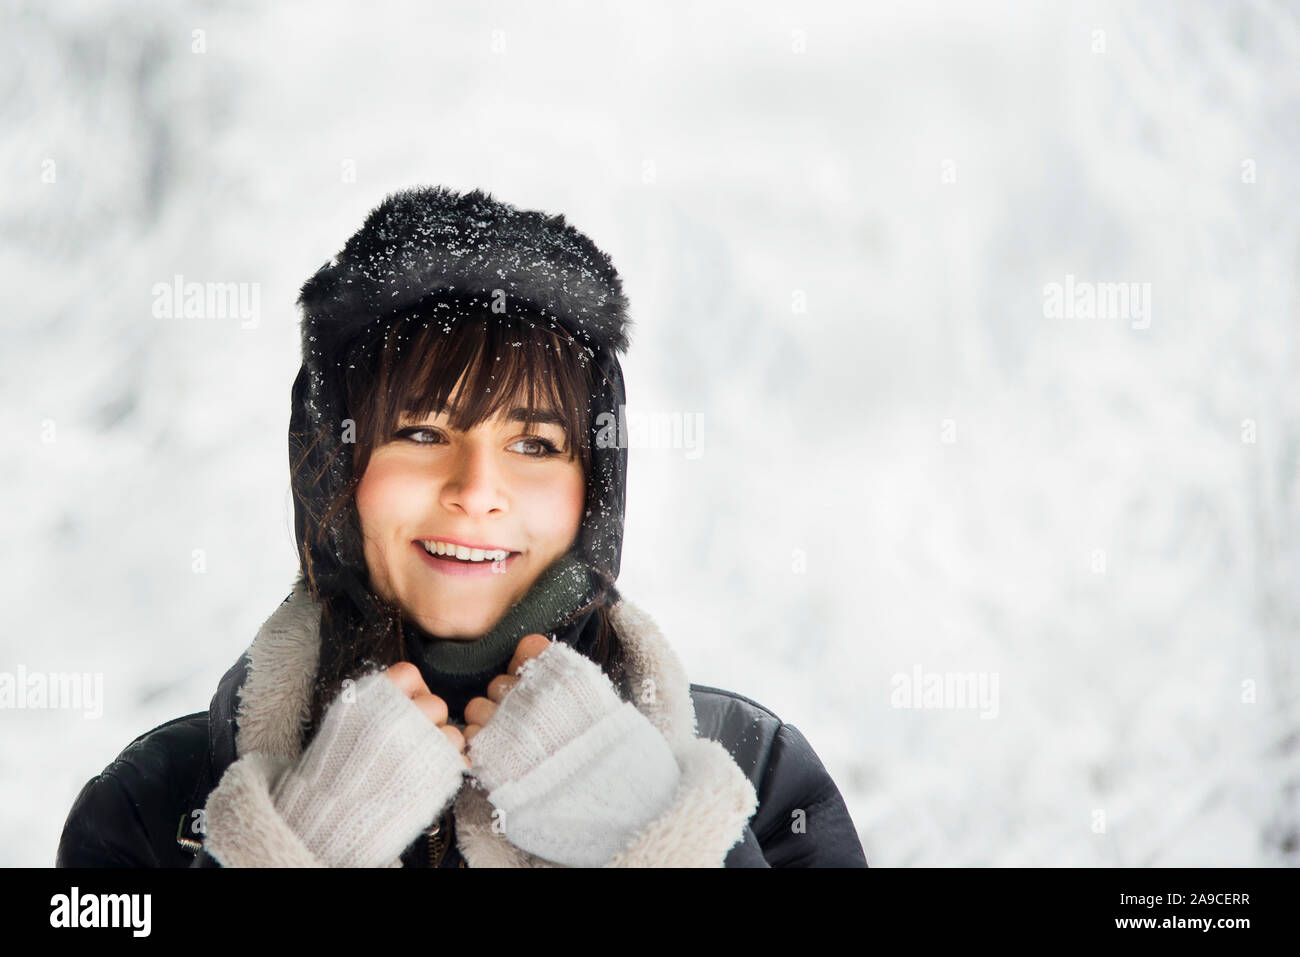 Portrait of a caucasian white woman under blizzard with hat, coat and bangs. Stock Photo